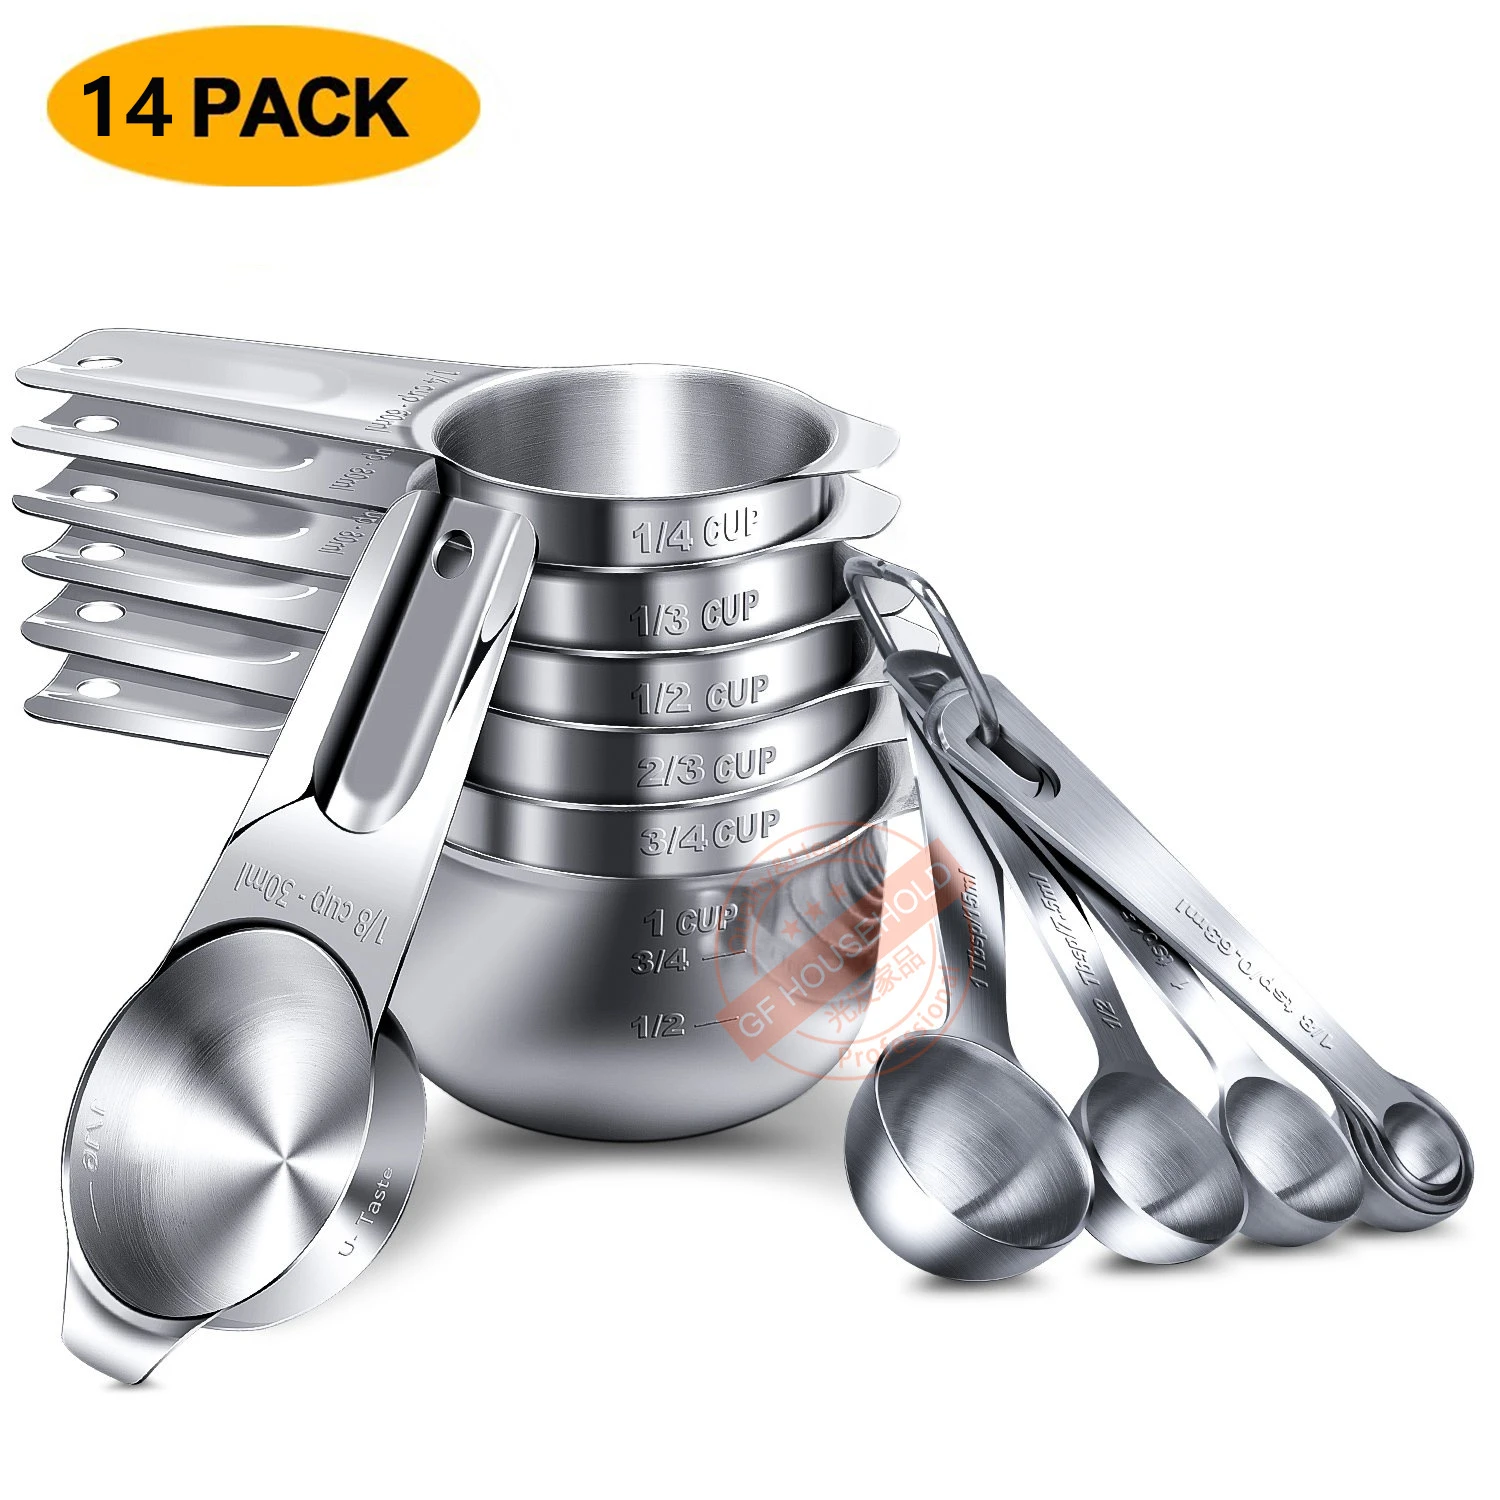 

Stainless Steel 14-piece Measuring Spoon Seasoning Spoon with Graduated Measuring Cup Baking Food Grade Measuring Spoon Kitchen